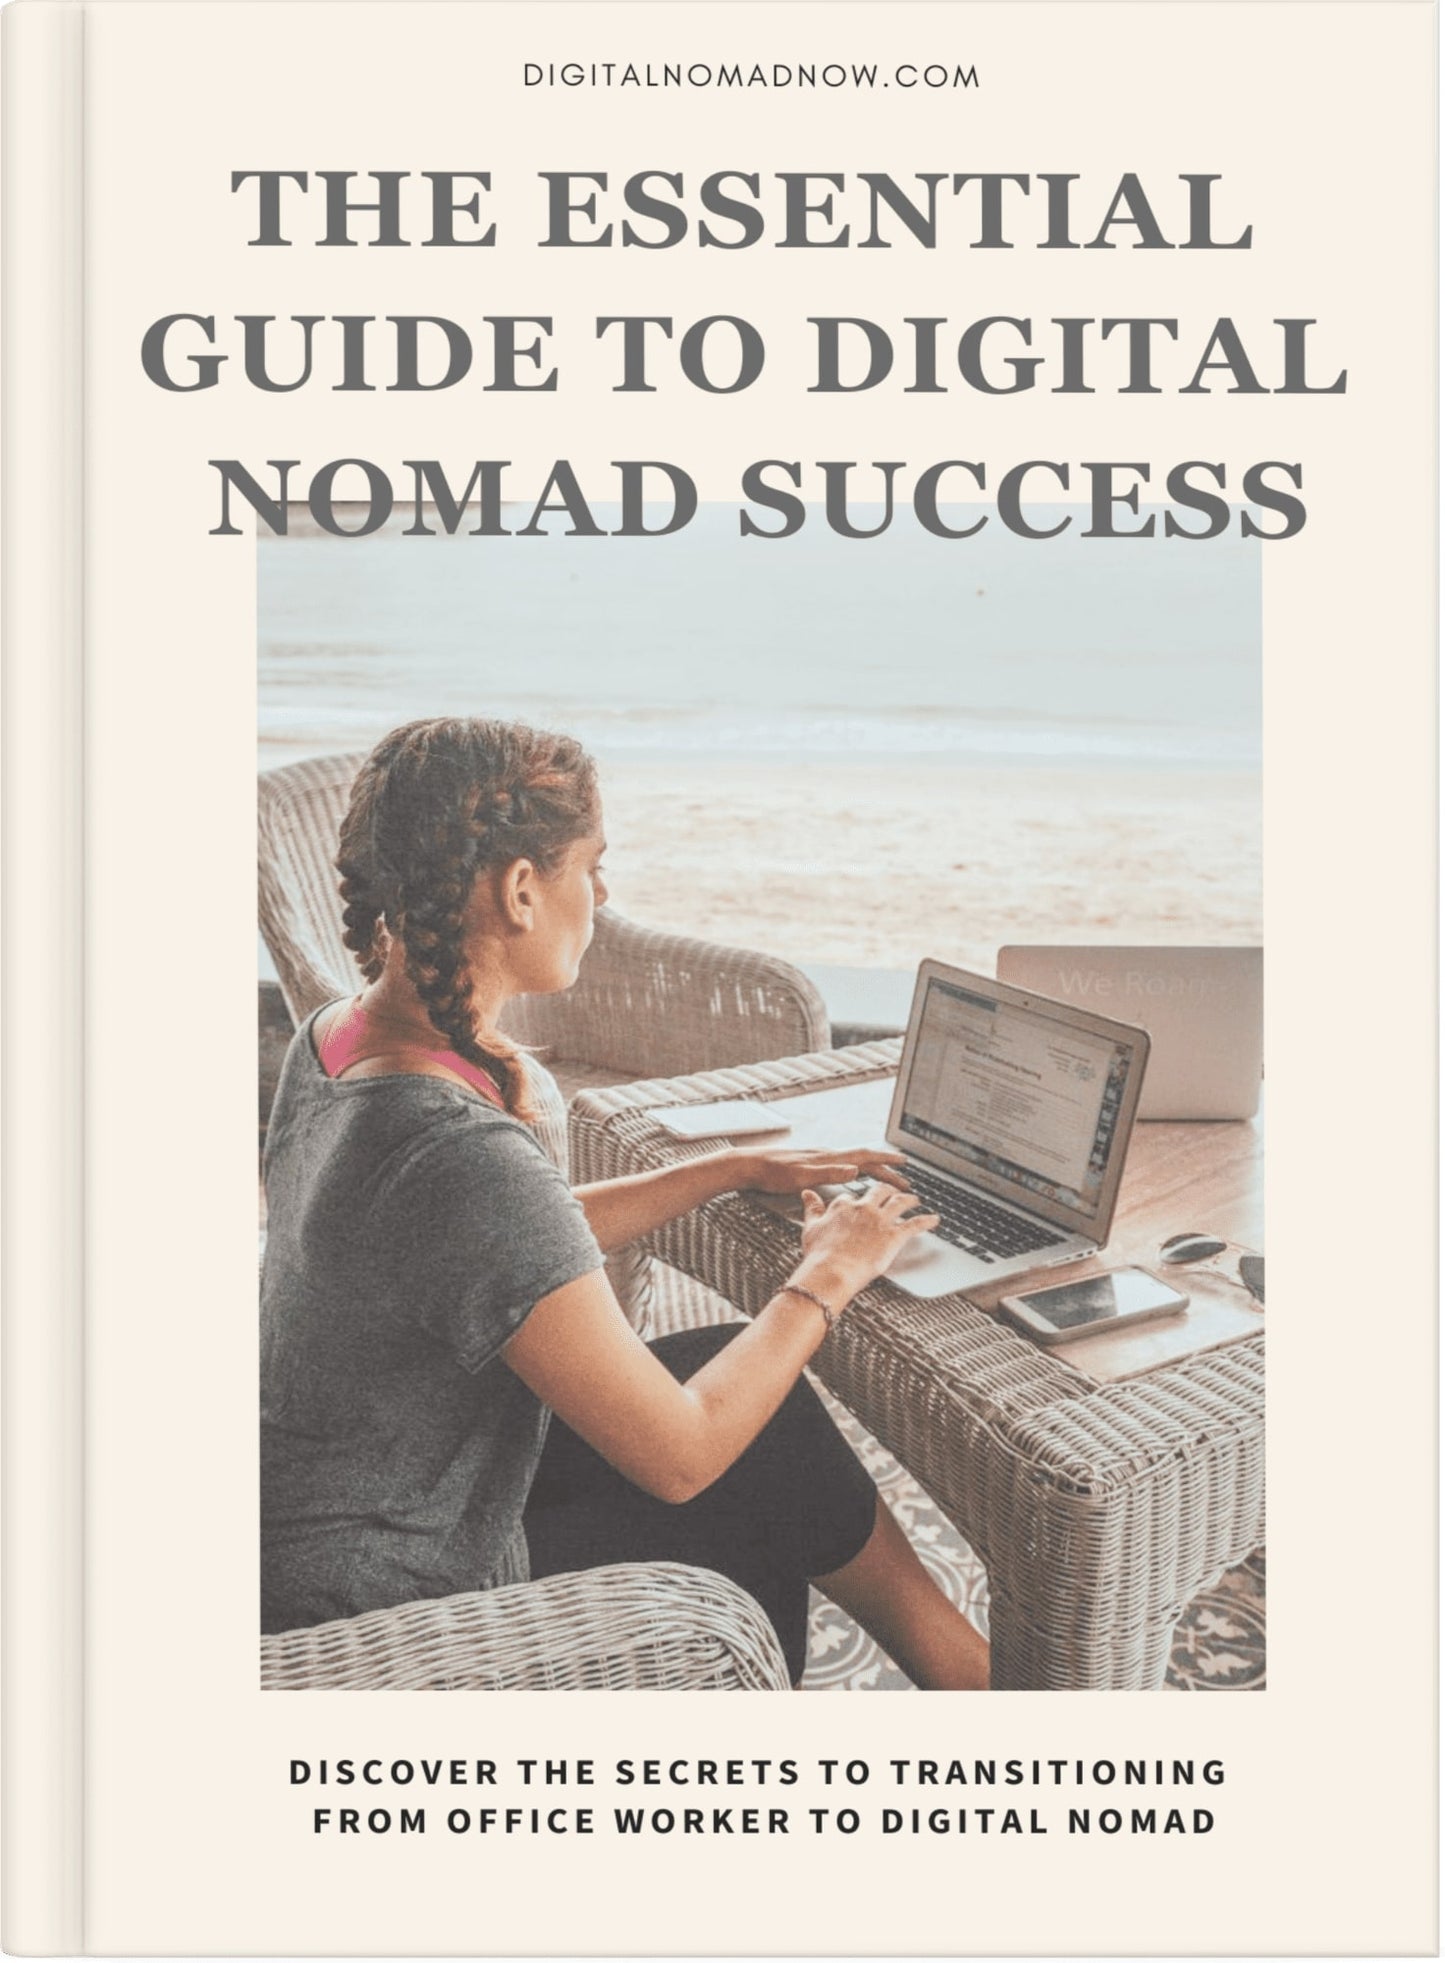 The Essential Guide to Digital Nomad Success